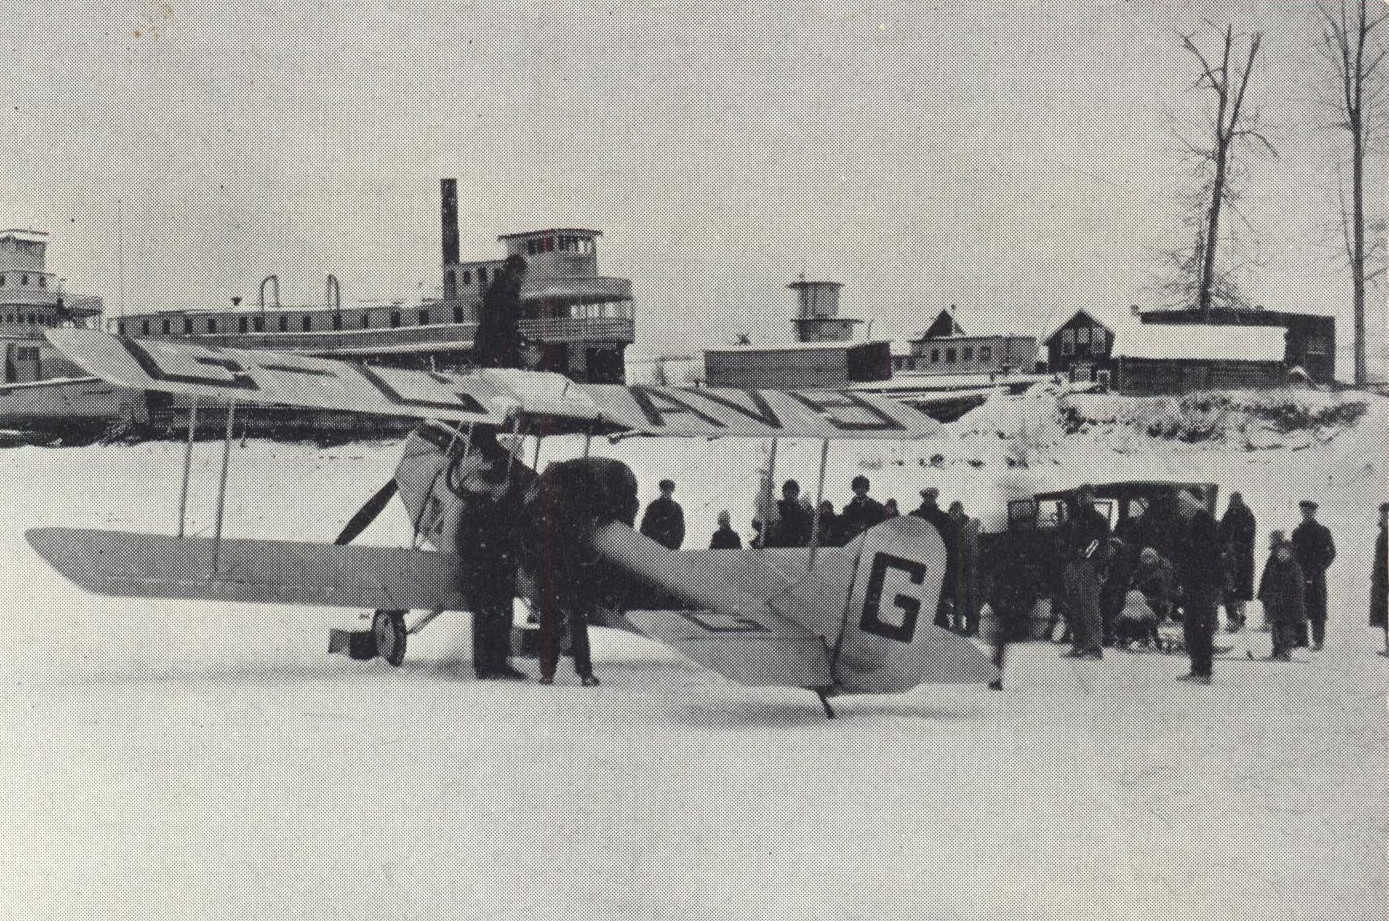 Biplane is greeted by group of people on an icy lake